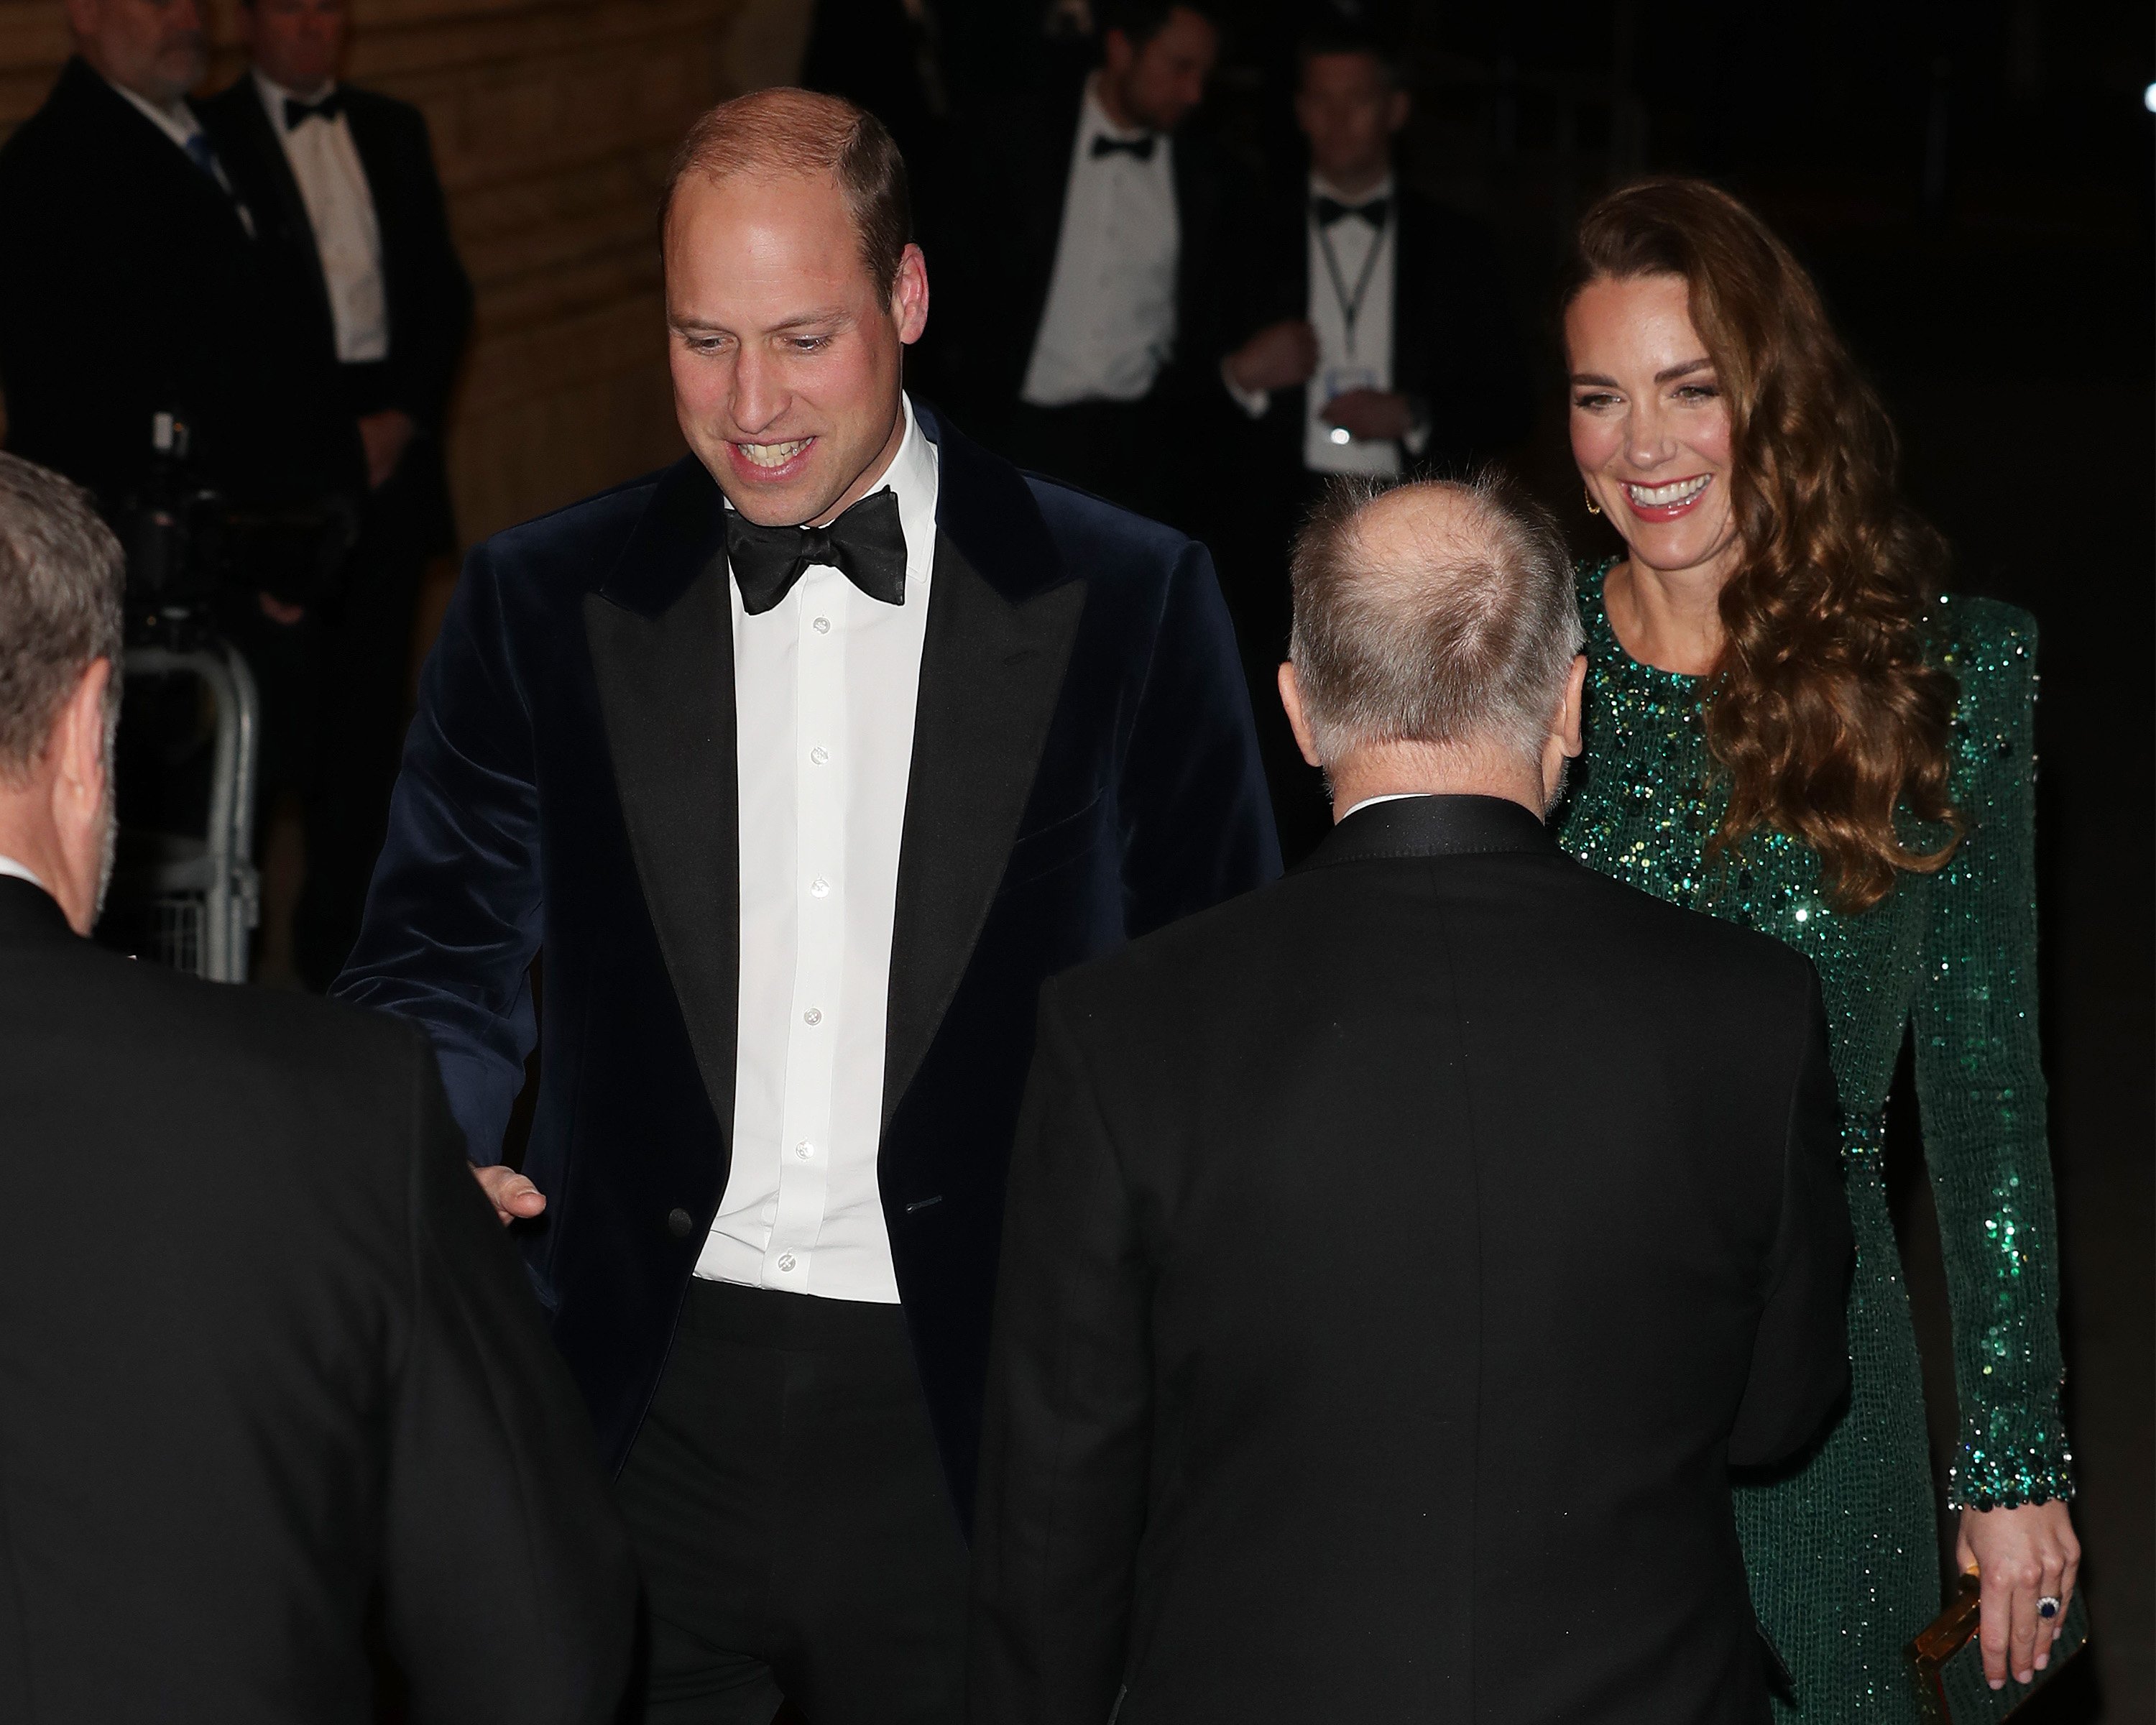 Prince William, Duke of Cambridge, and Catherine, Duchess of Cambridge attend the Royal Variety Performance at Royal Albert Hall on November 18, 2021, in London, England. | Source: Getty Images